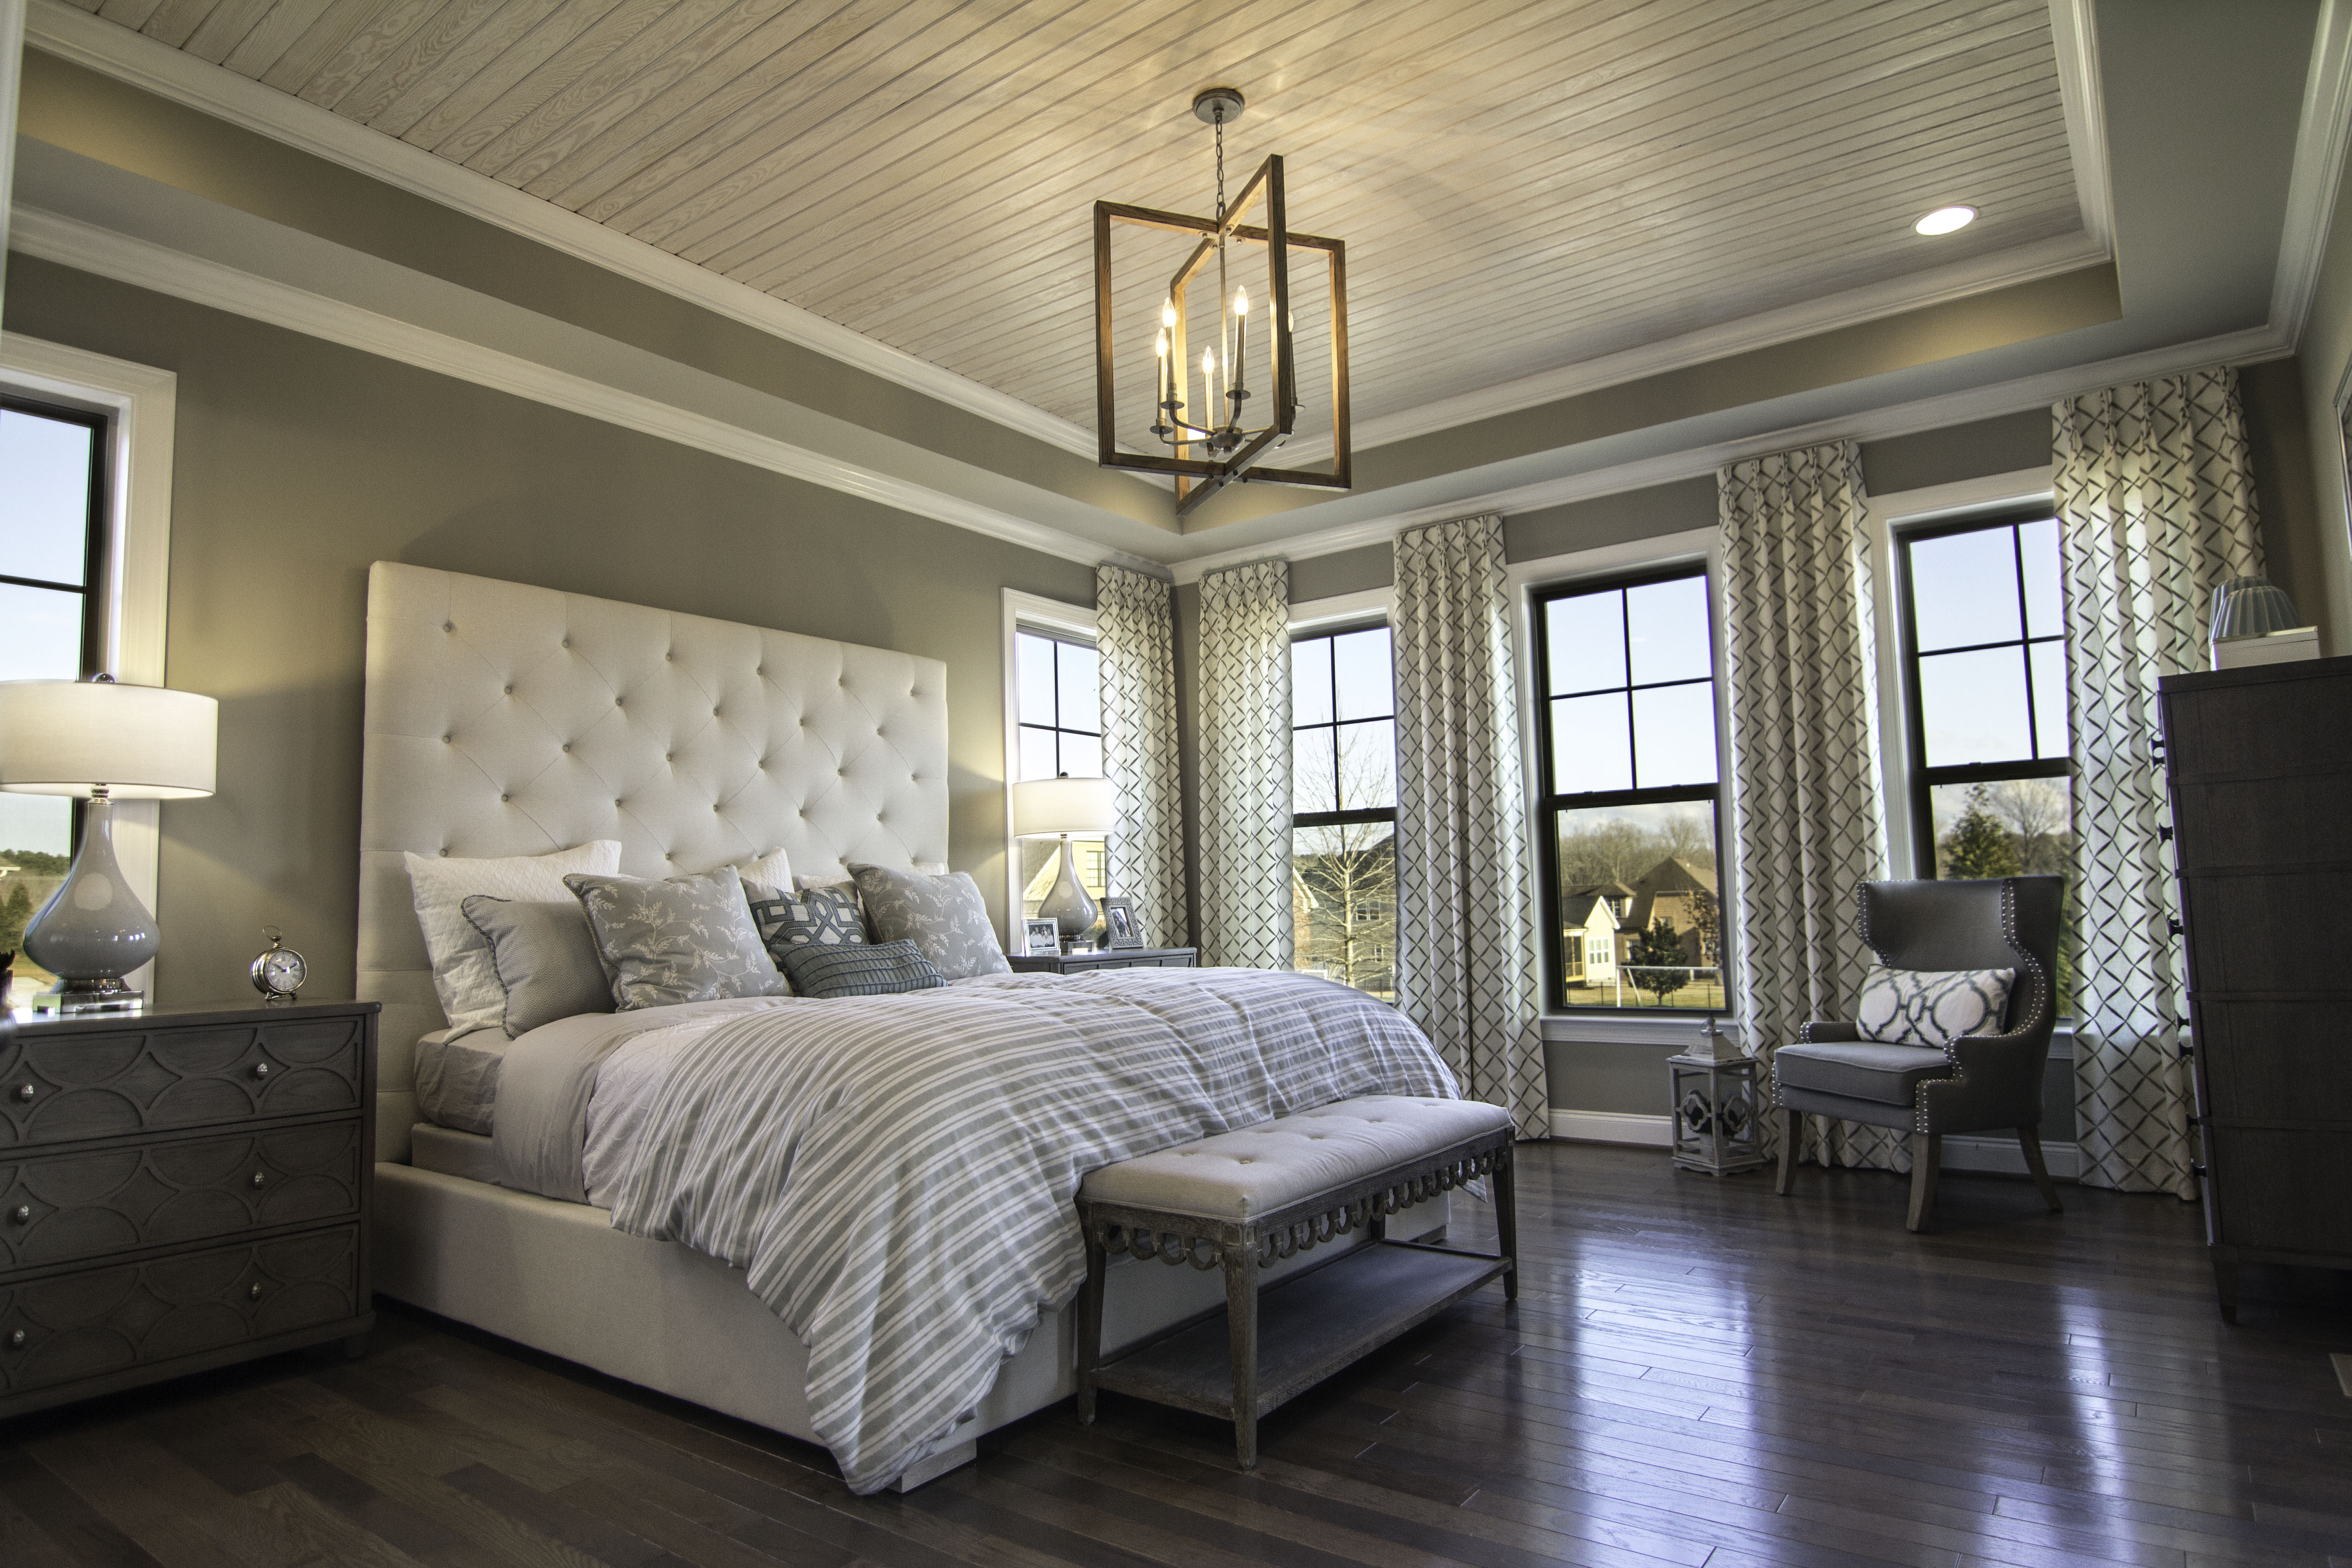 Tray Ceilings and hardwood floors adorn this Owner's Bedroom in the Crawford plan at Banks Pointe.